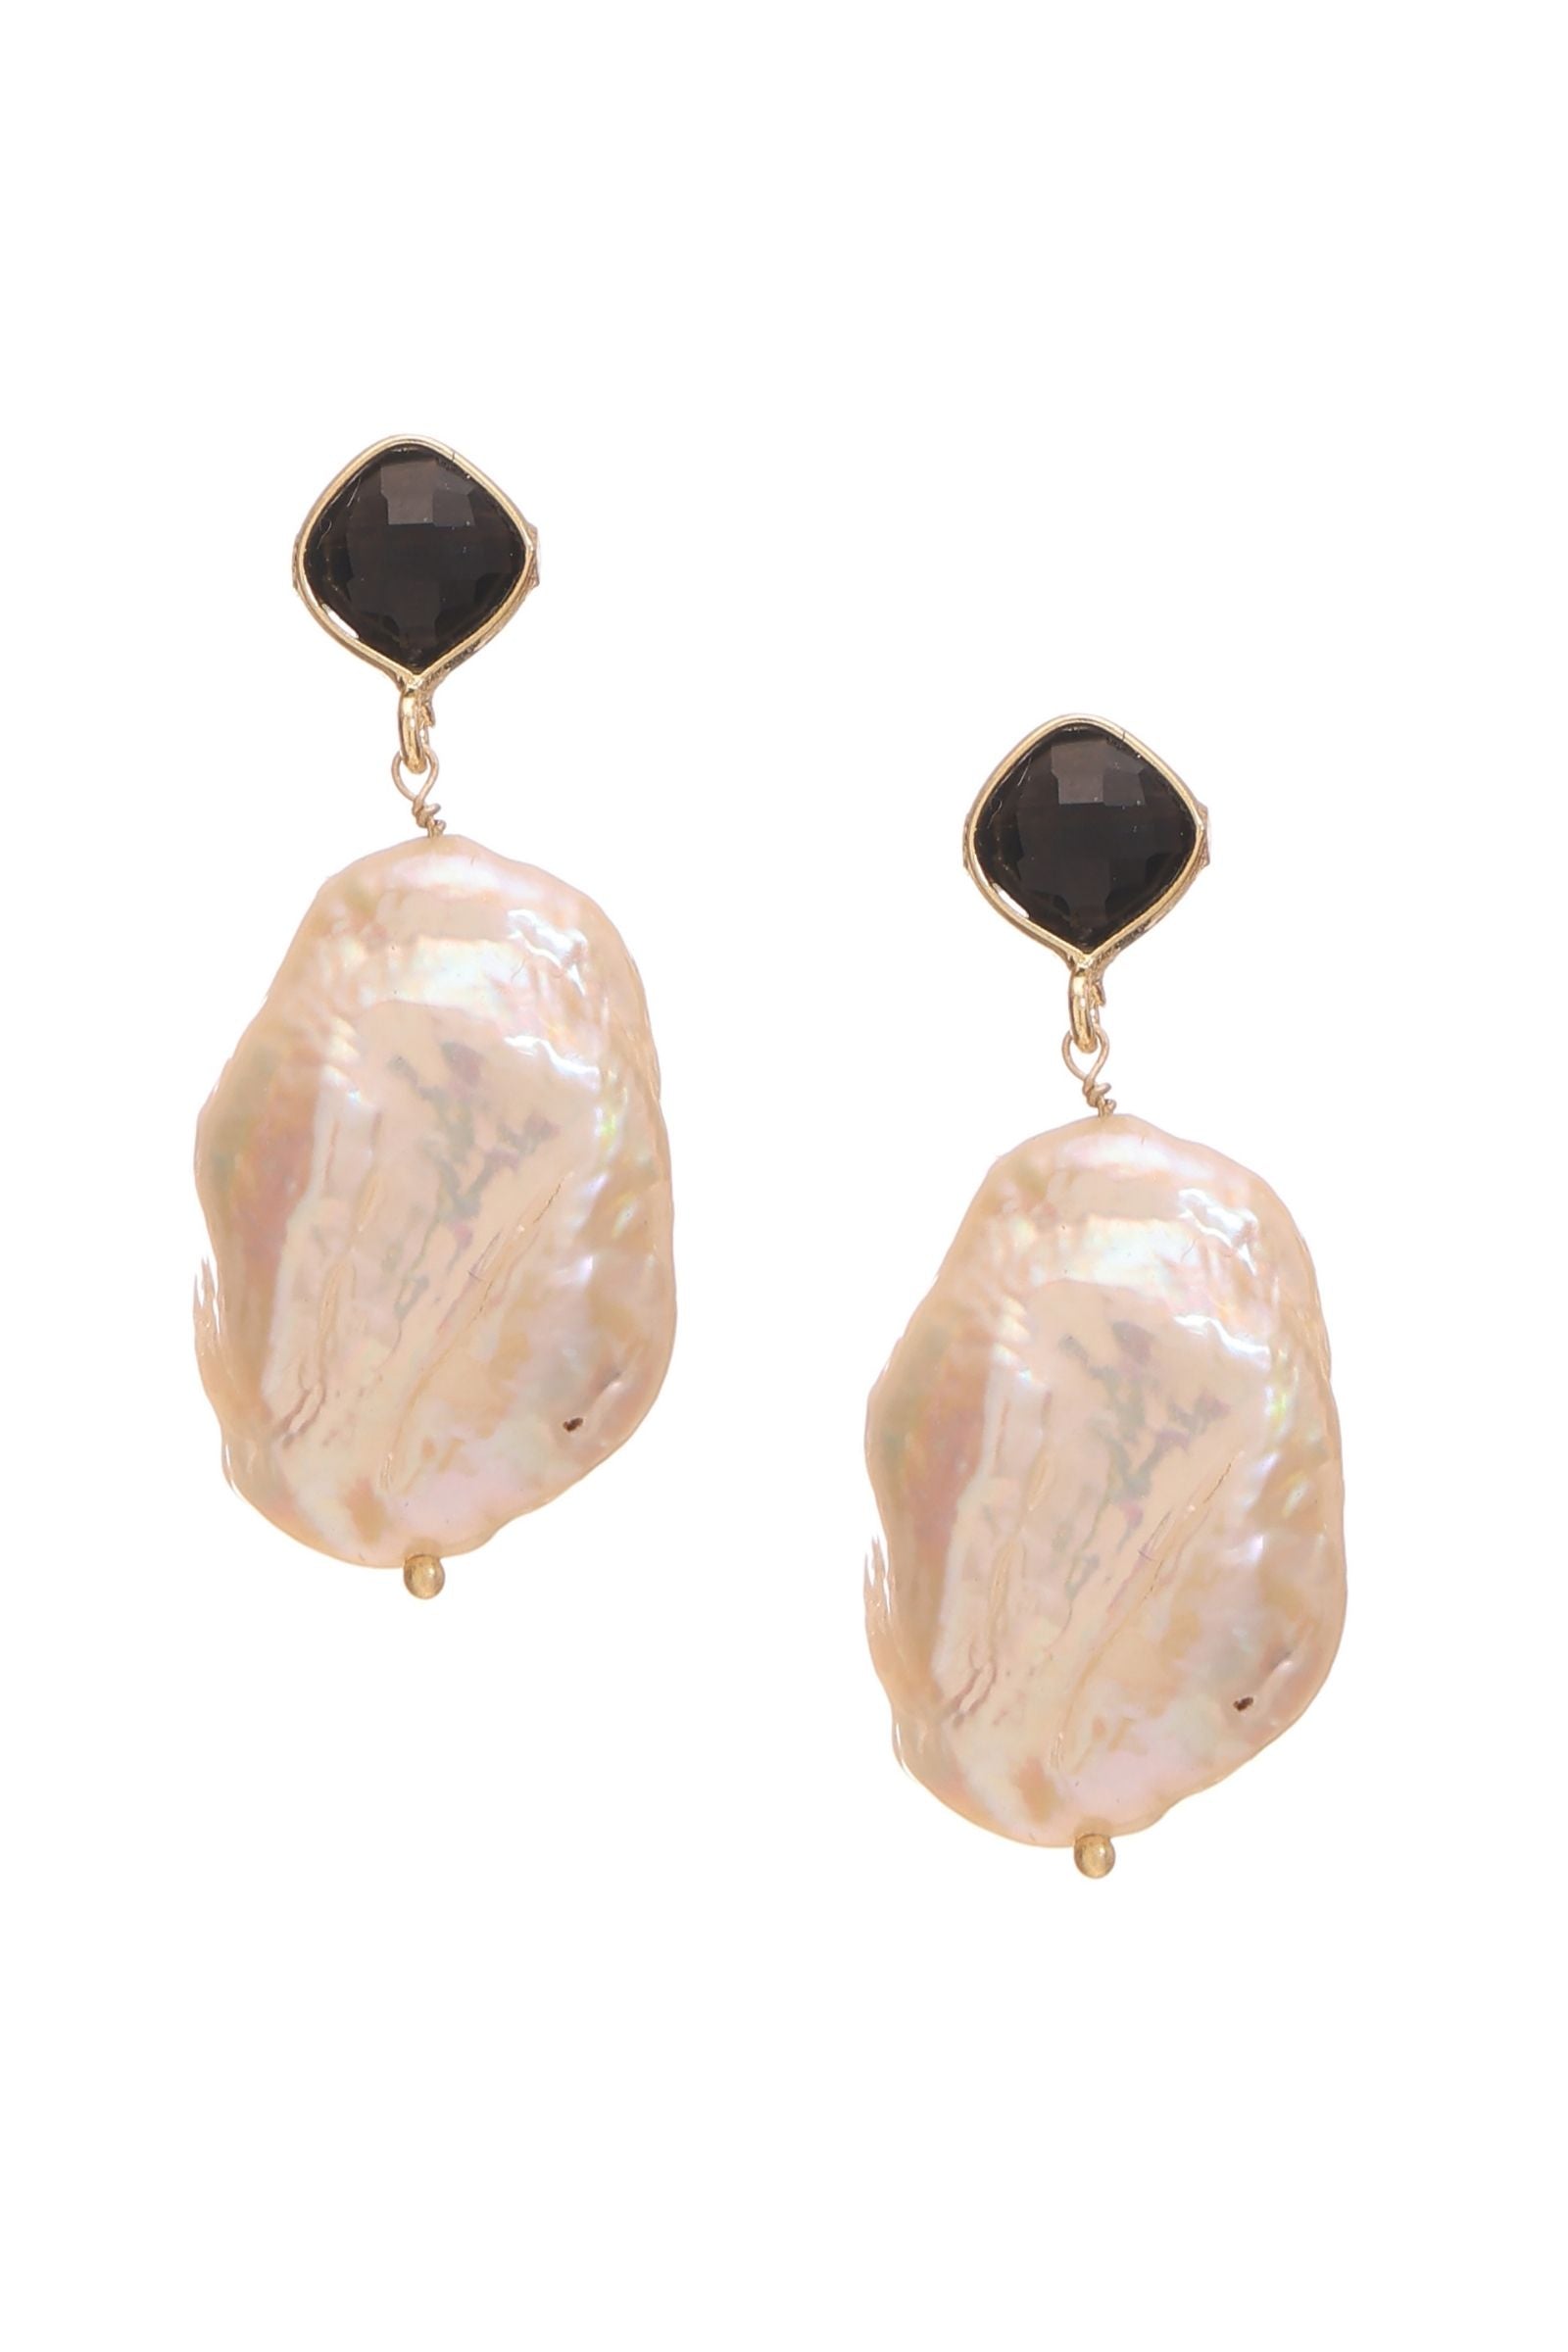 Black Onyx with Pearl Drop Earring